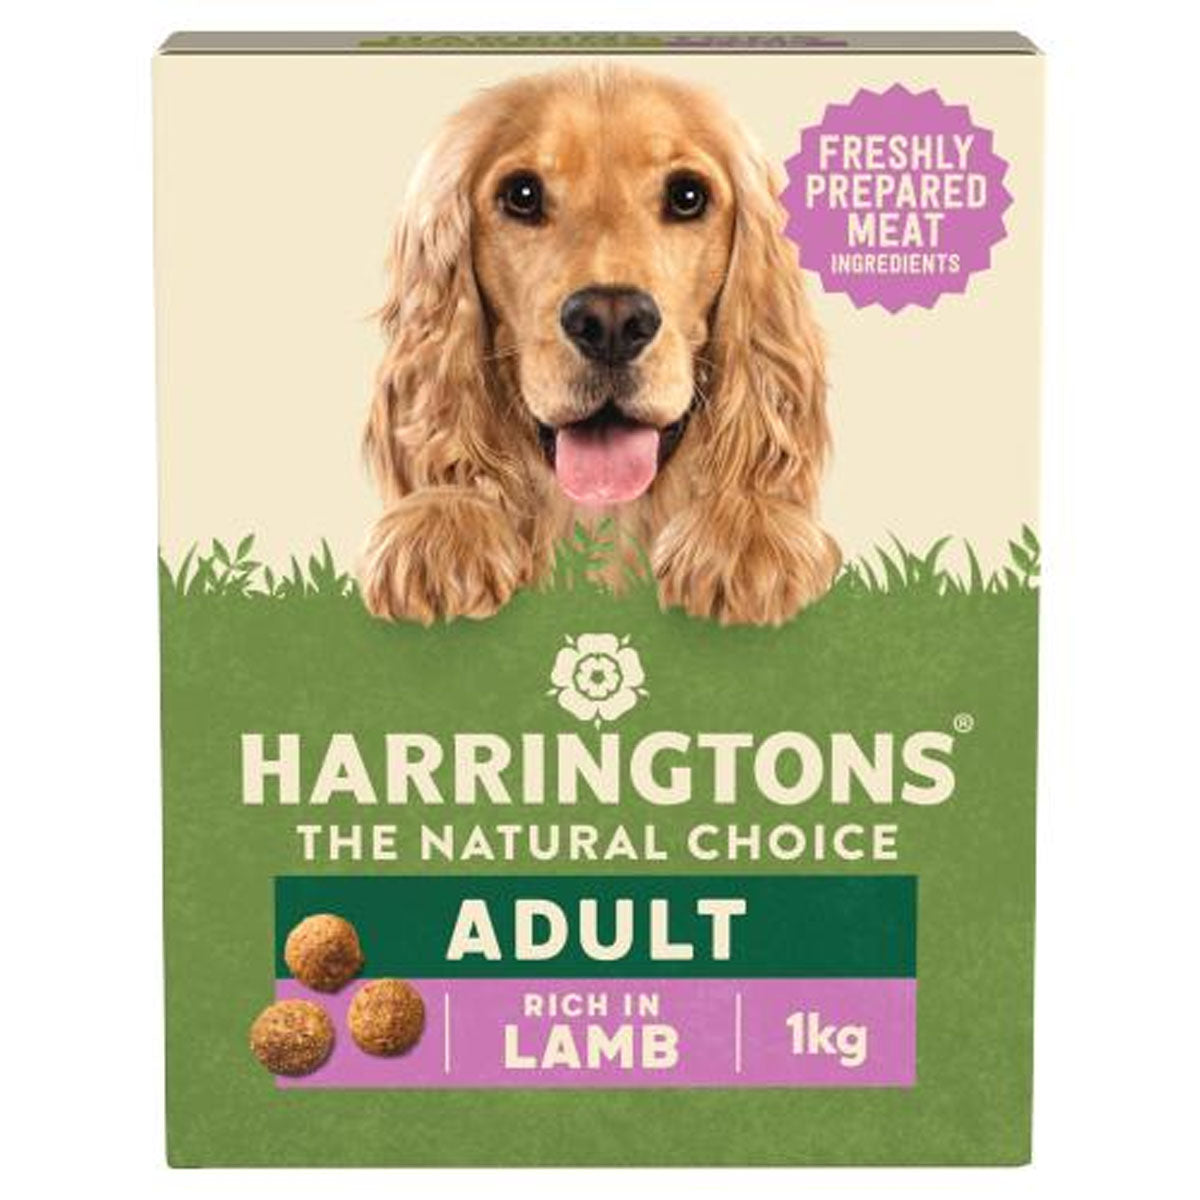 Harringtons - Adult Rich in Lamb & Rice - 1kg - Continental Food Store